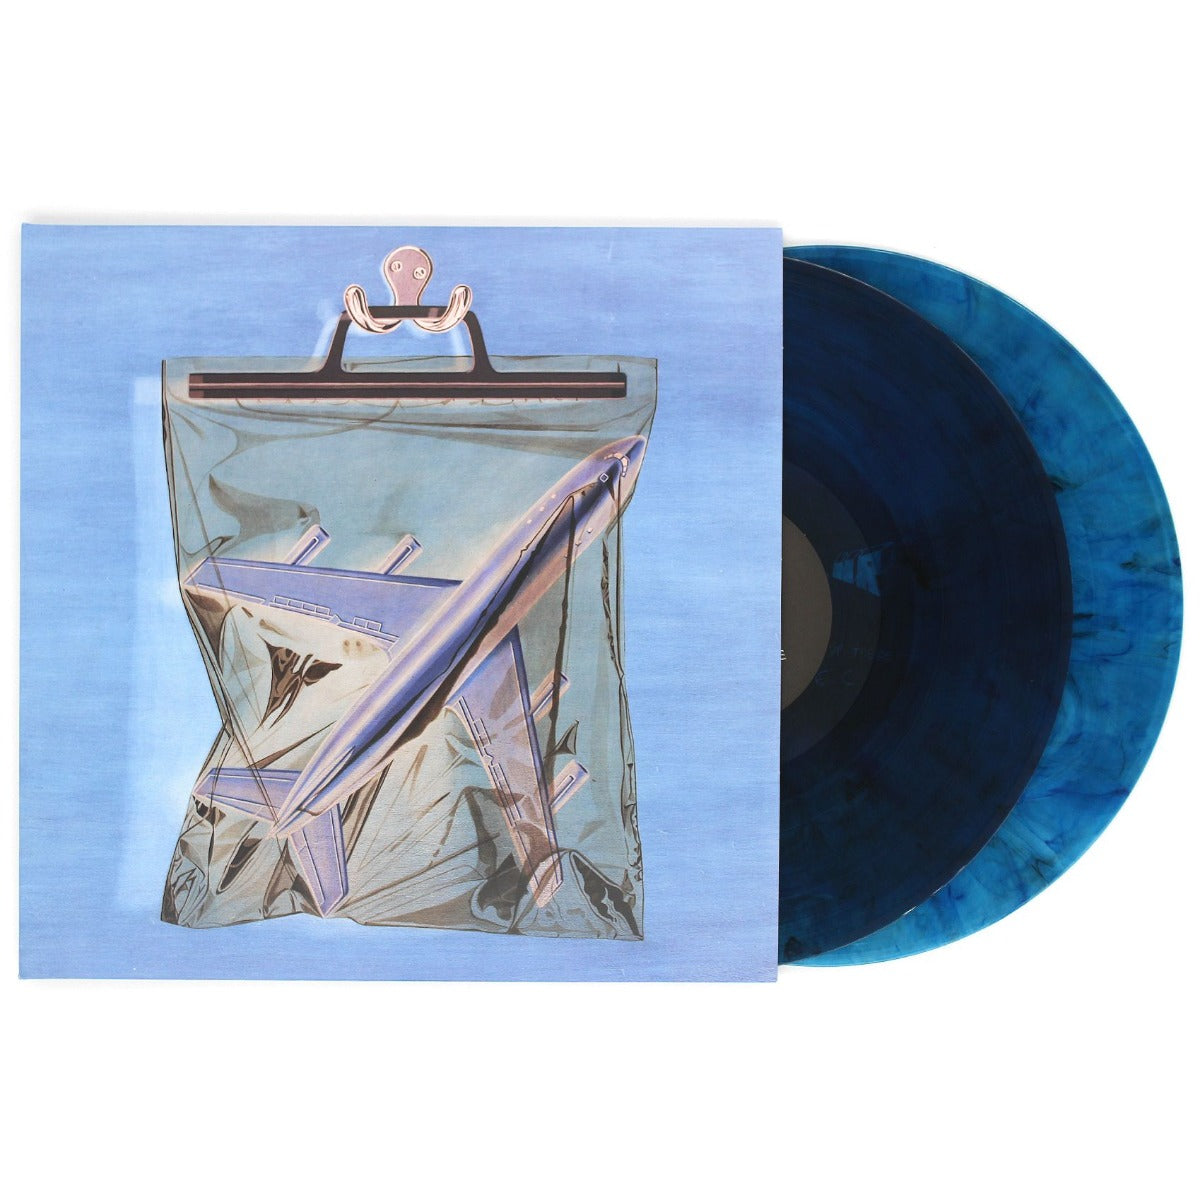 Ants From Up There (Indie Exclusive, Blue Marbled Vinyl) (With Book, Gatefold LP Jacket, 140 Gram Vinyl) (2 Lp's)